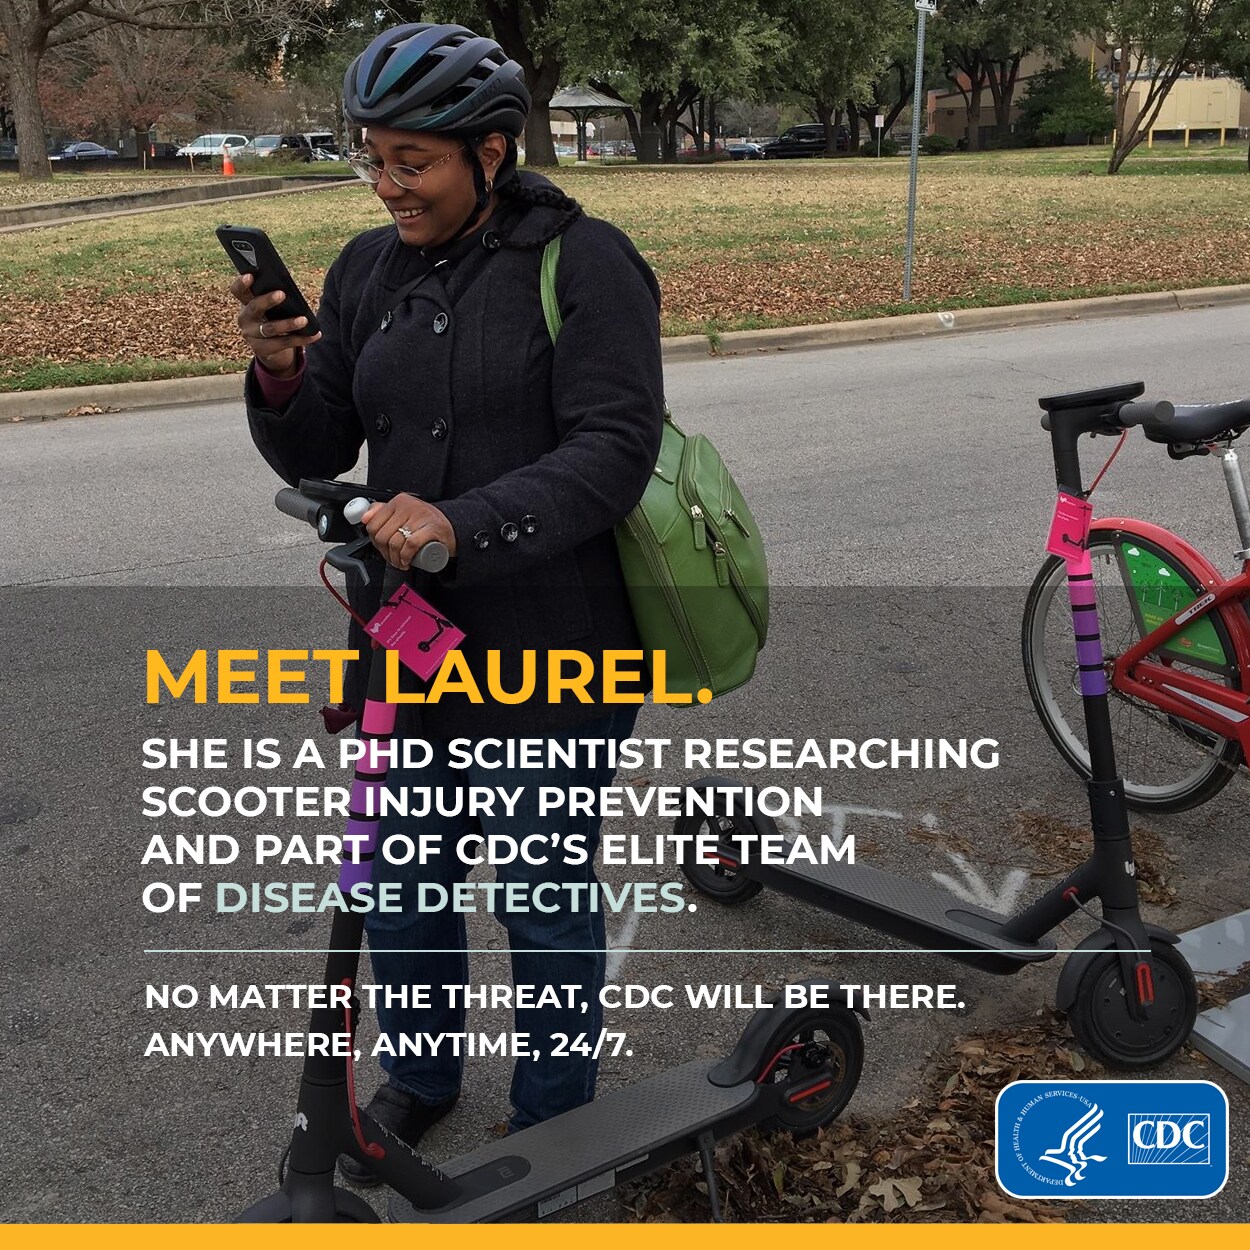 Meet Laurel. She is a physician and phd scientist researching scooter injury prevention and part of CDC's elite team of disease detectives. No matter the threat, CDC will be there. Anywhere, anytime, 24/7